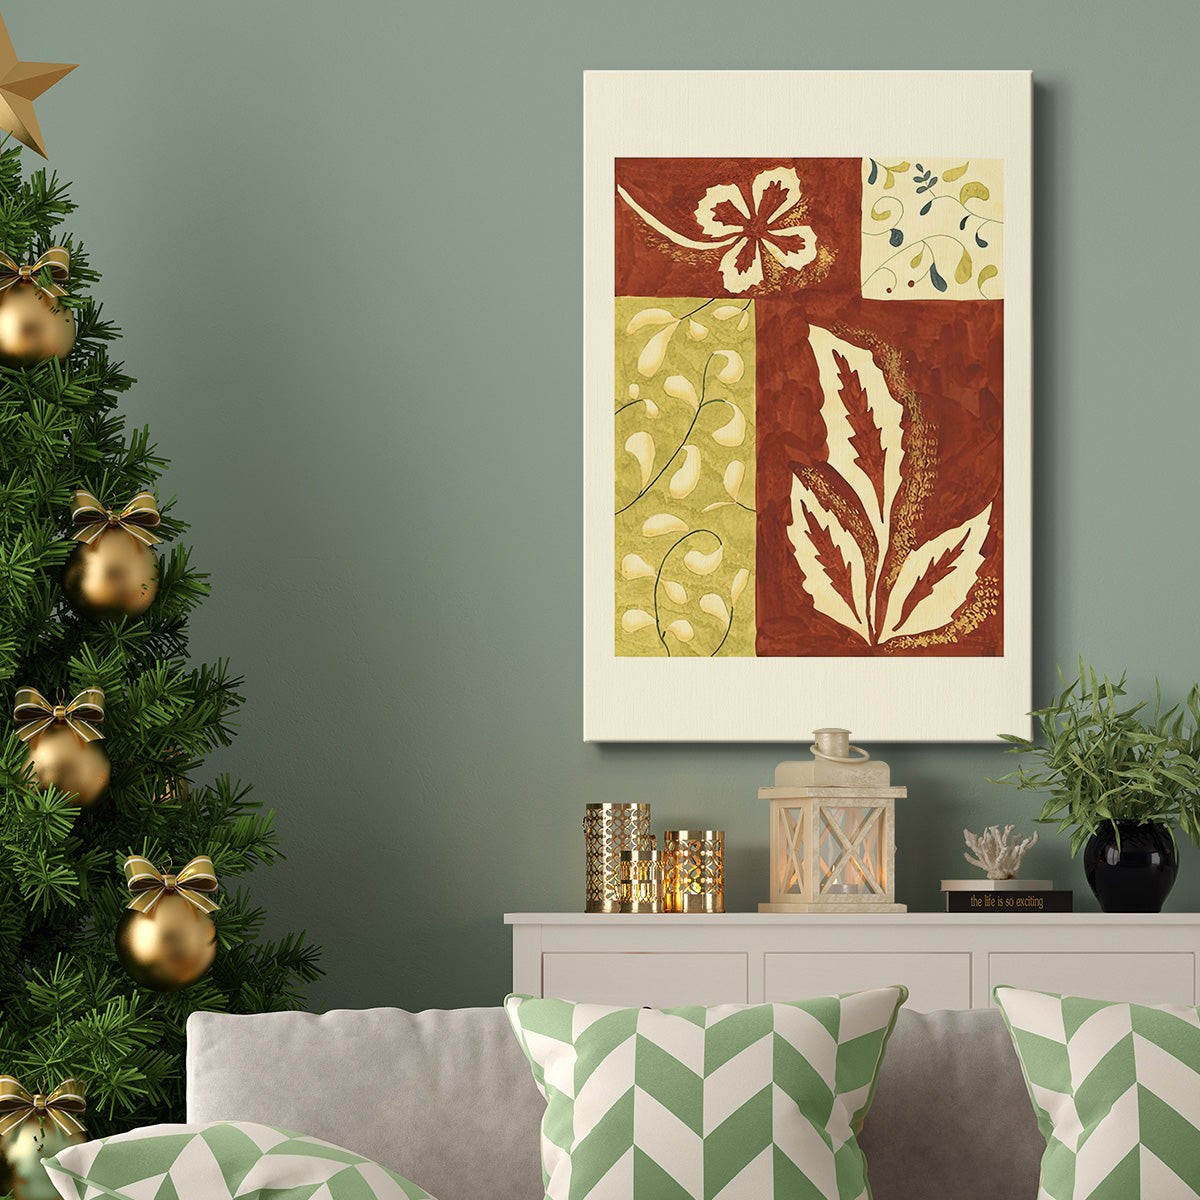 Festive Floral I - Gallery Wrapped Canvas